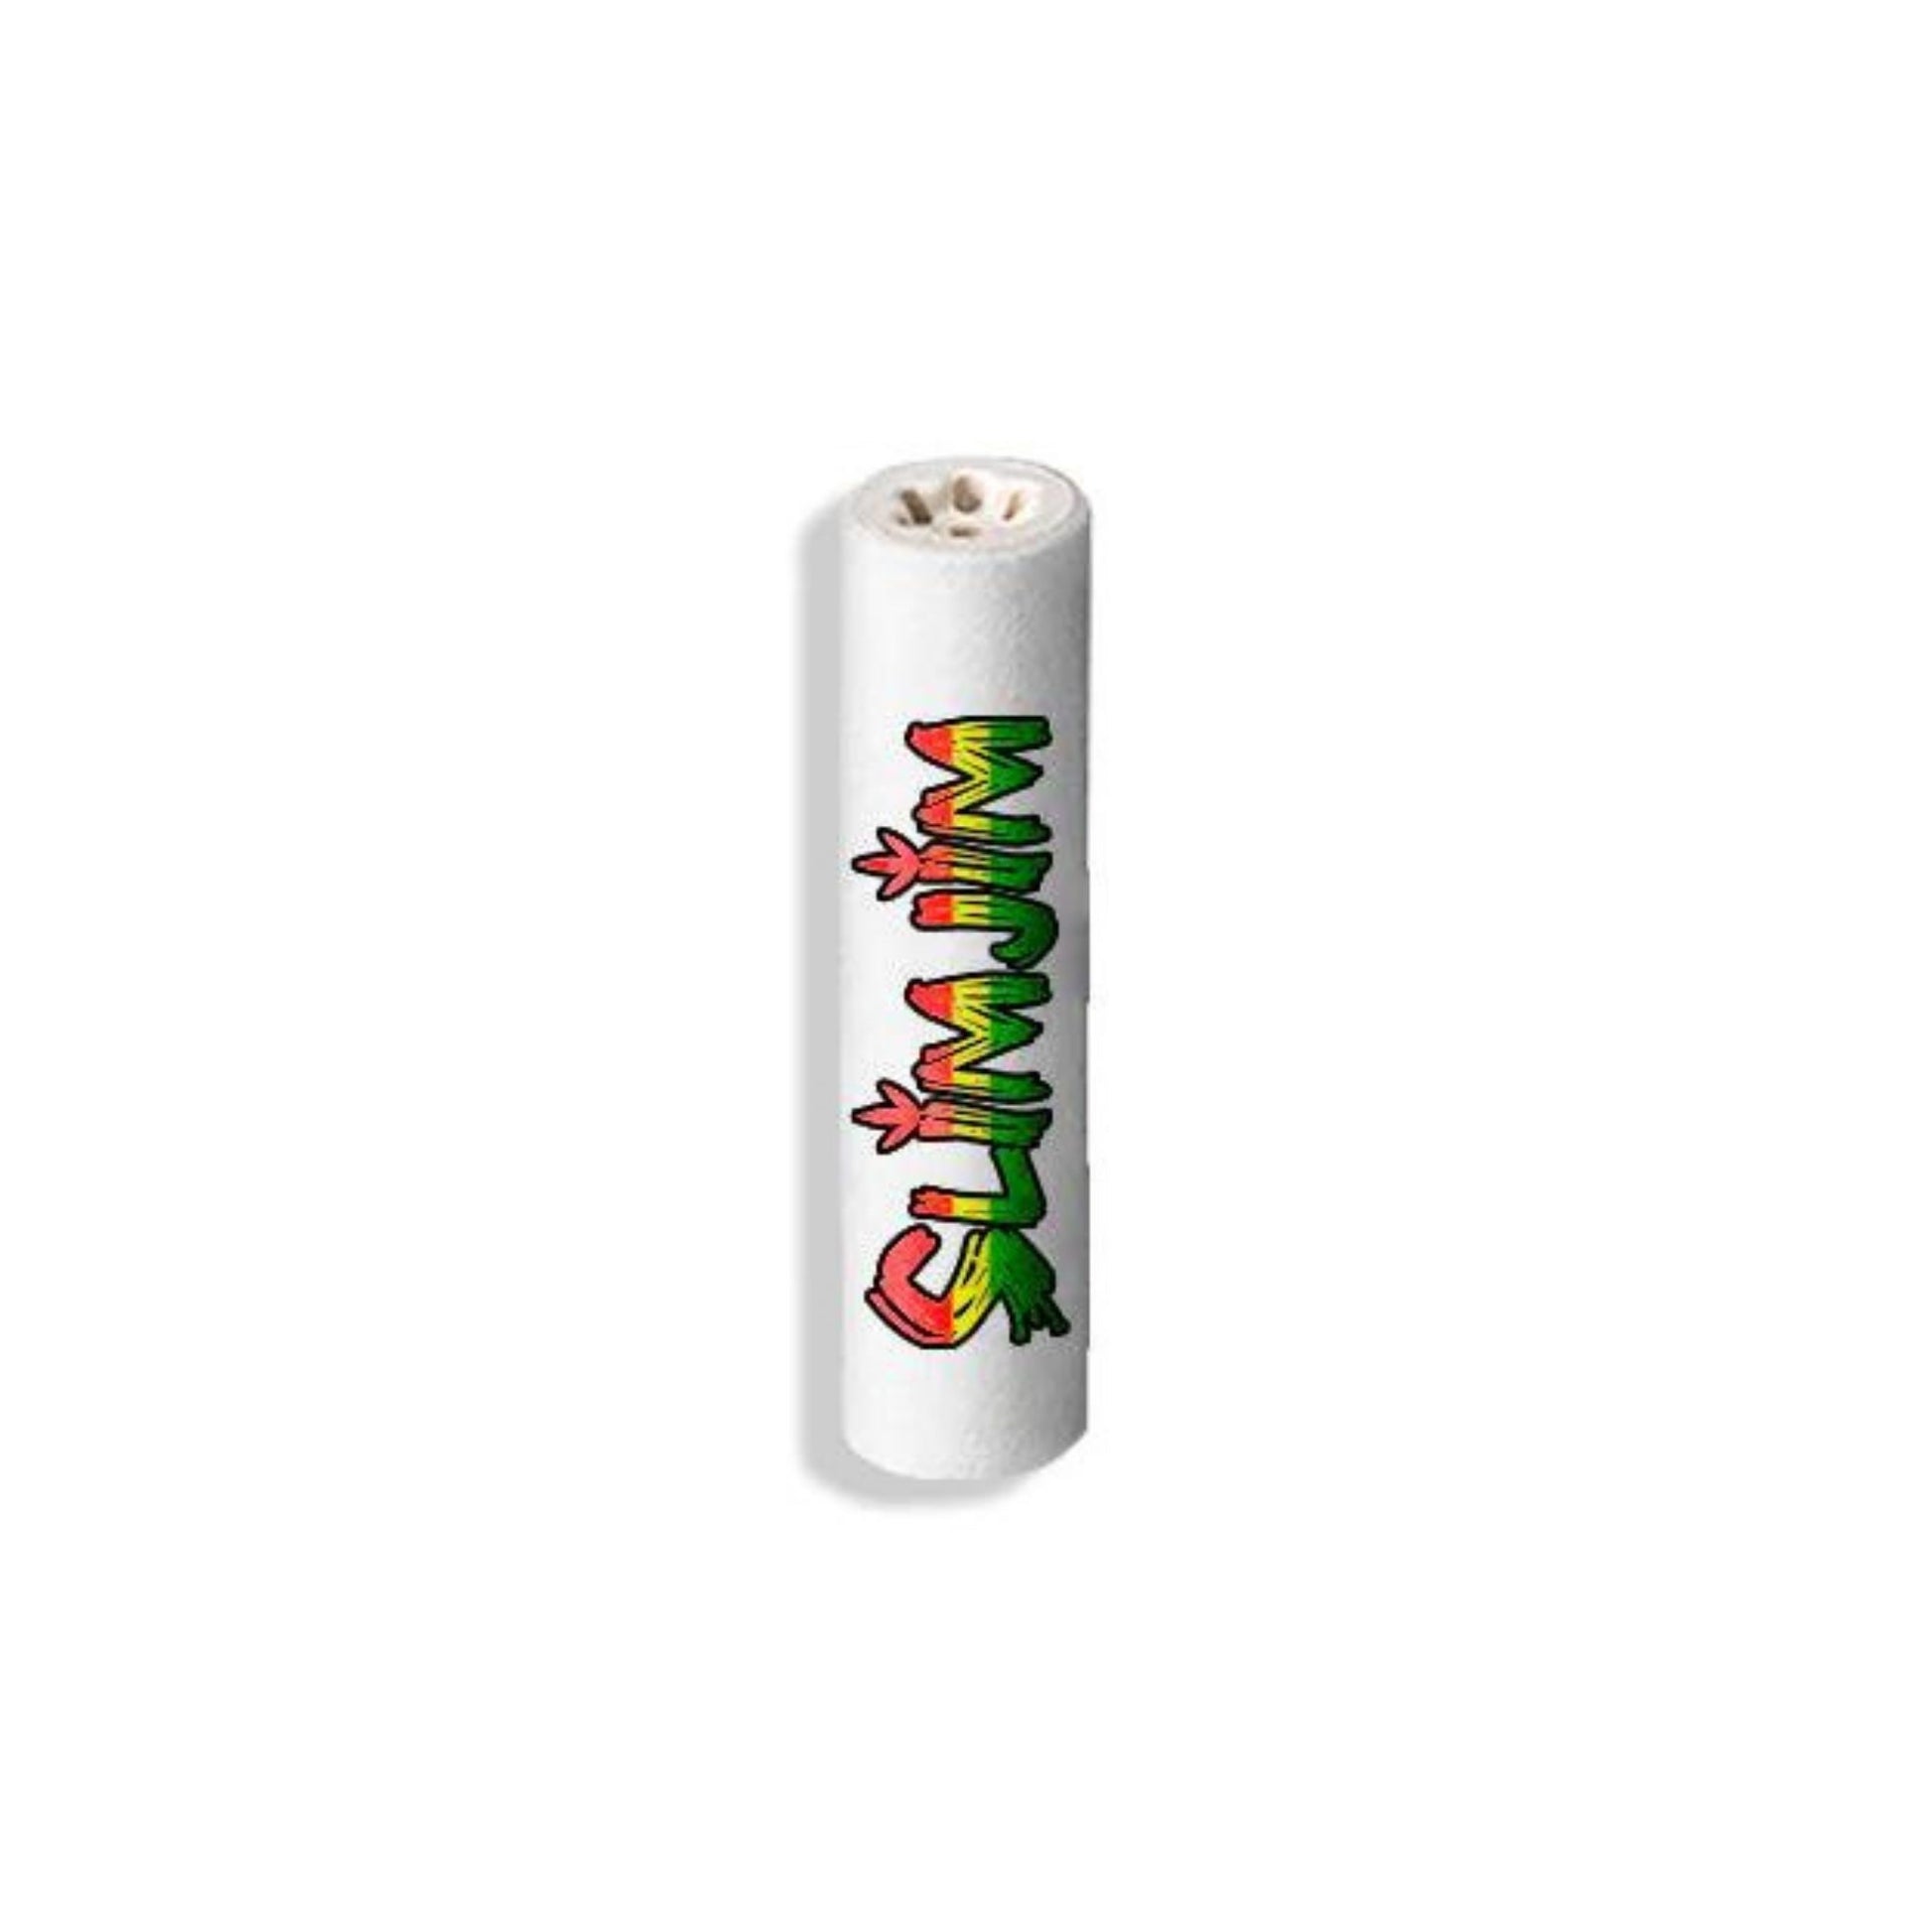 SLIMJIM Classic Carbon Filters Pack of 10 HighJack India